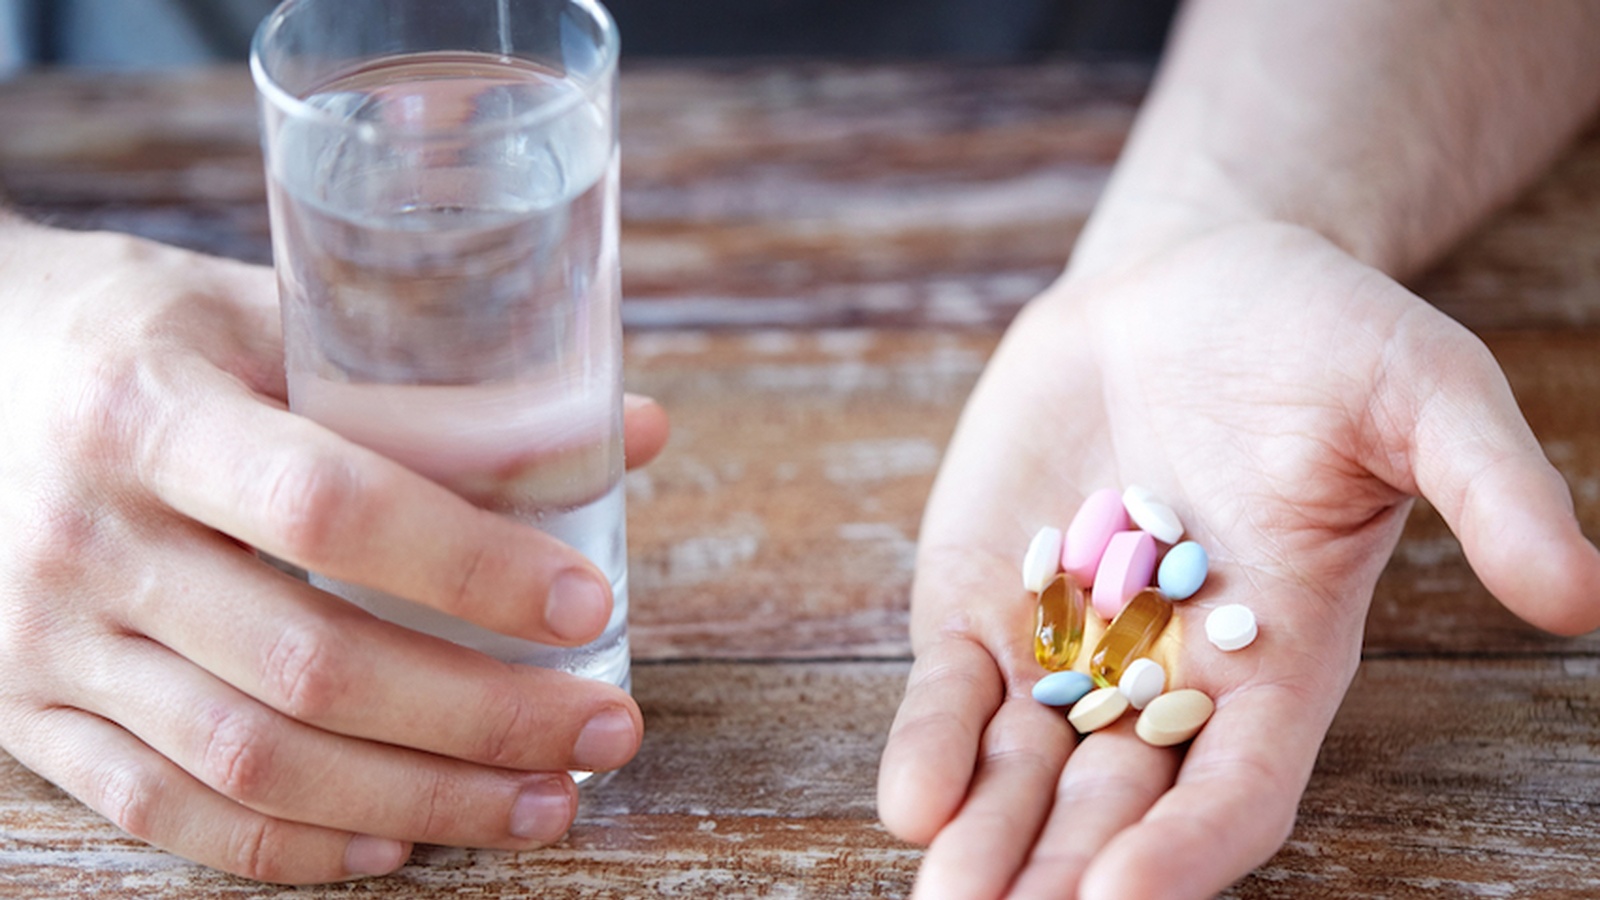 5 Weight Loss Supplements You Should Never Use